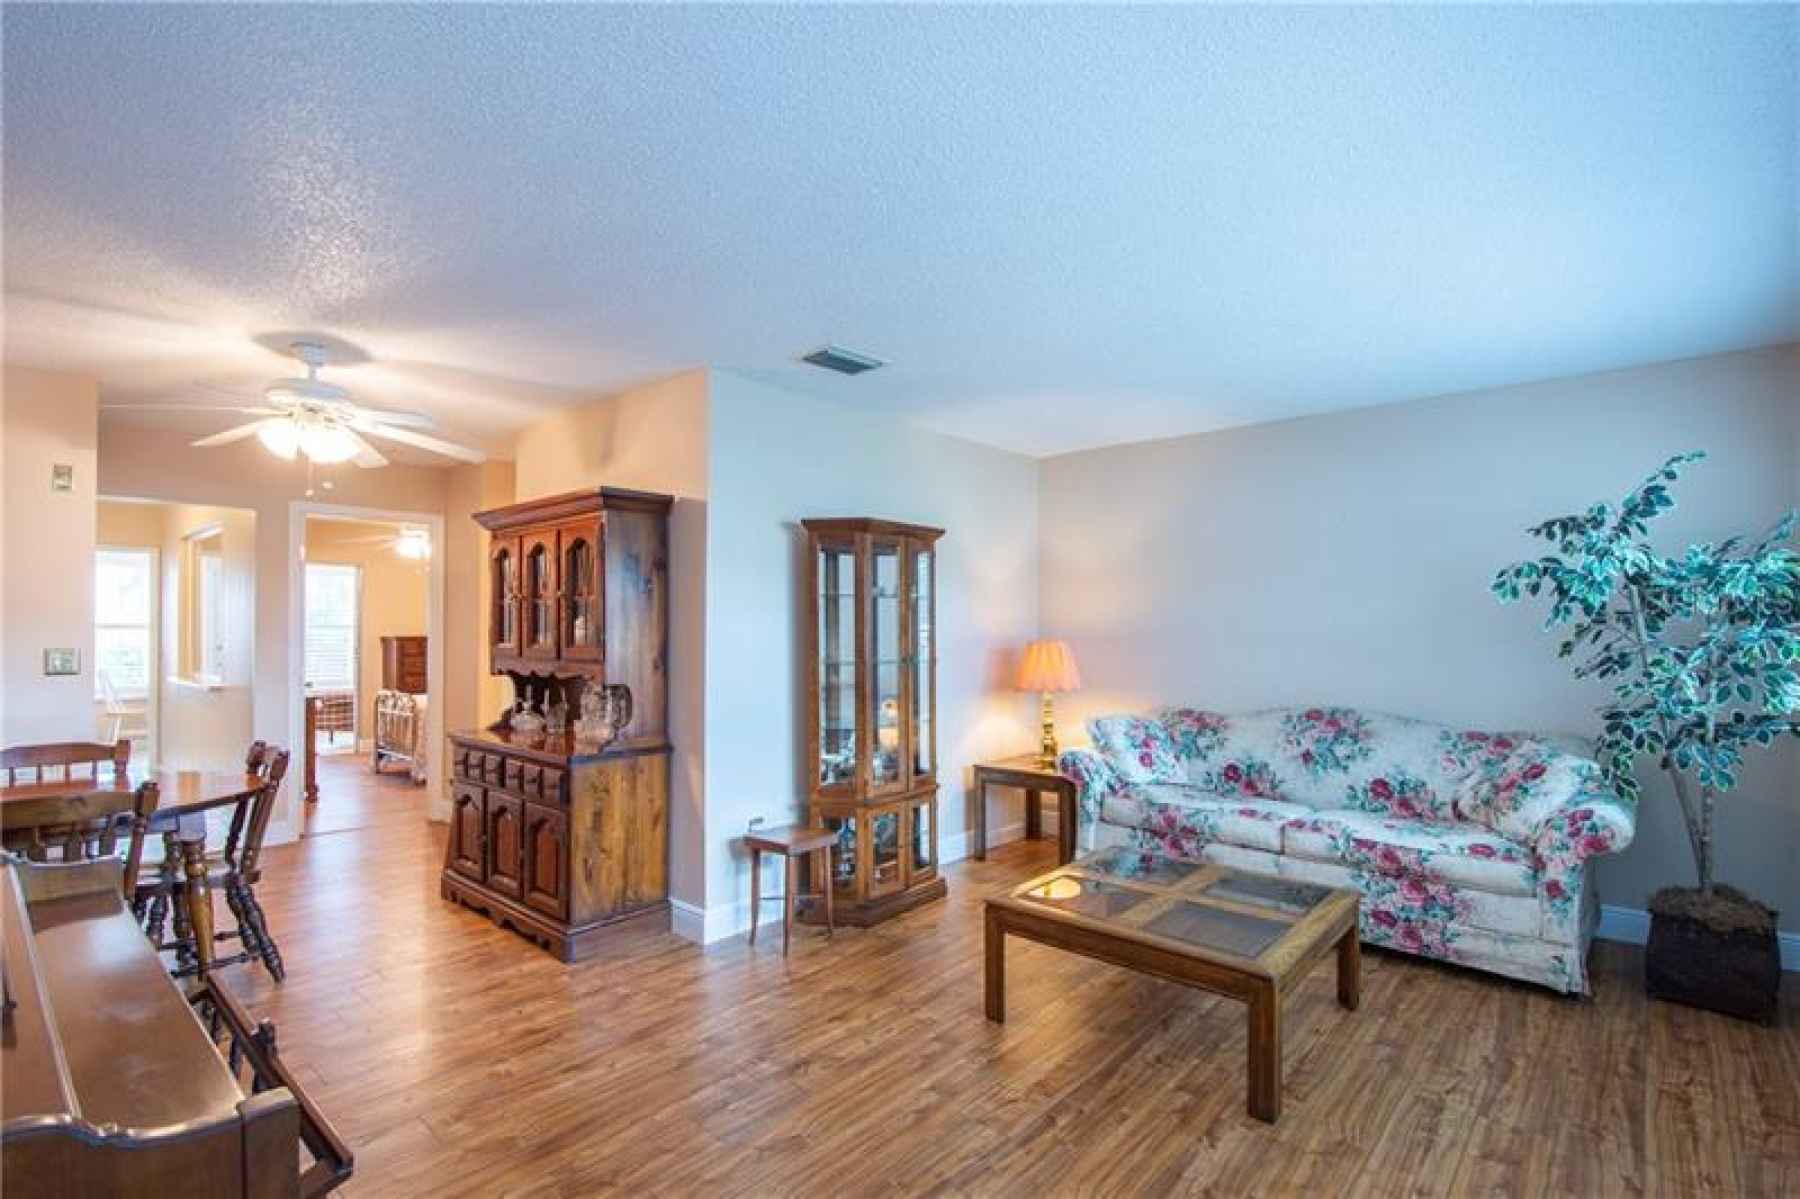 Nice open Living room / Dining room combination. Looking towards bedroom and kitchen.